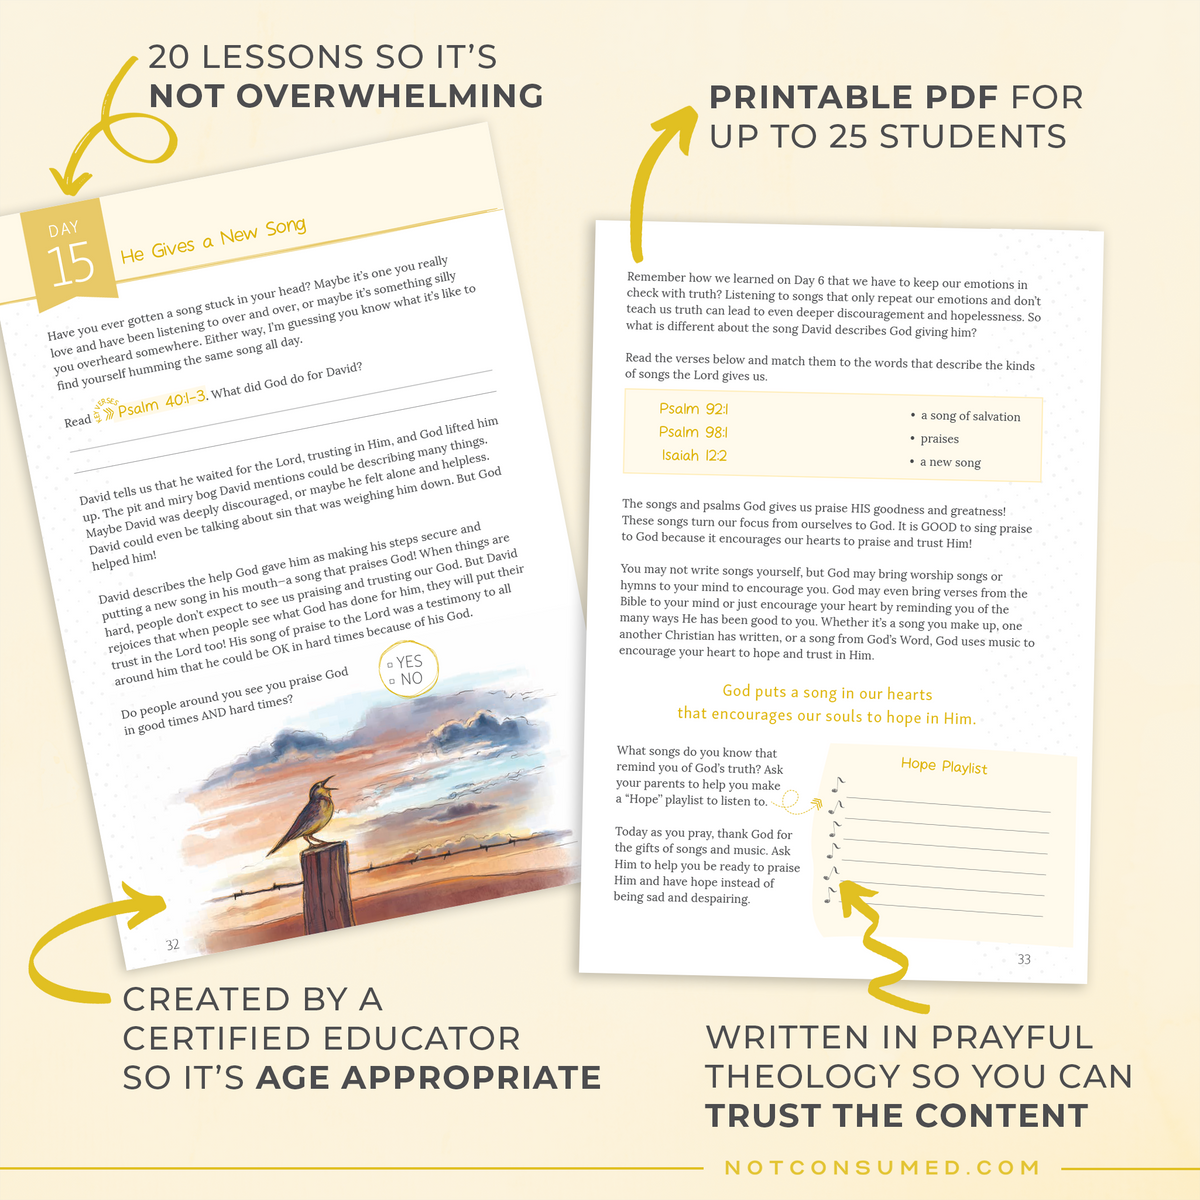 Abounding in Hope digital printable Bible Study features for groups